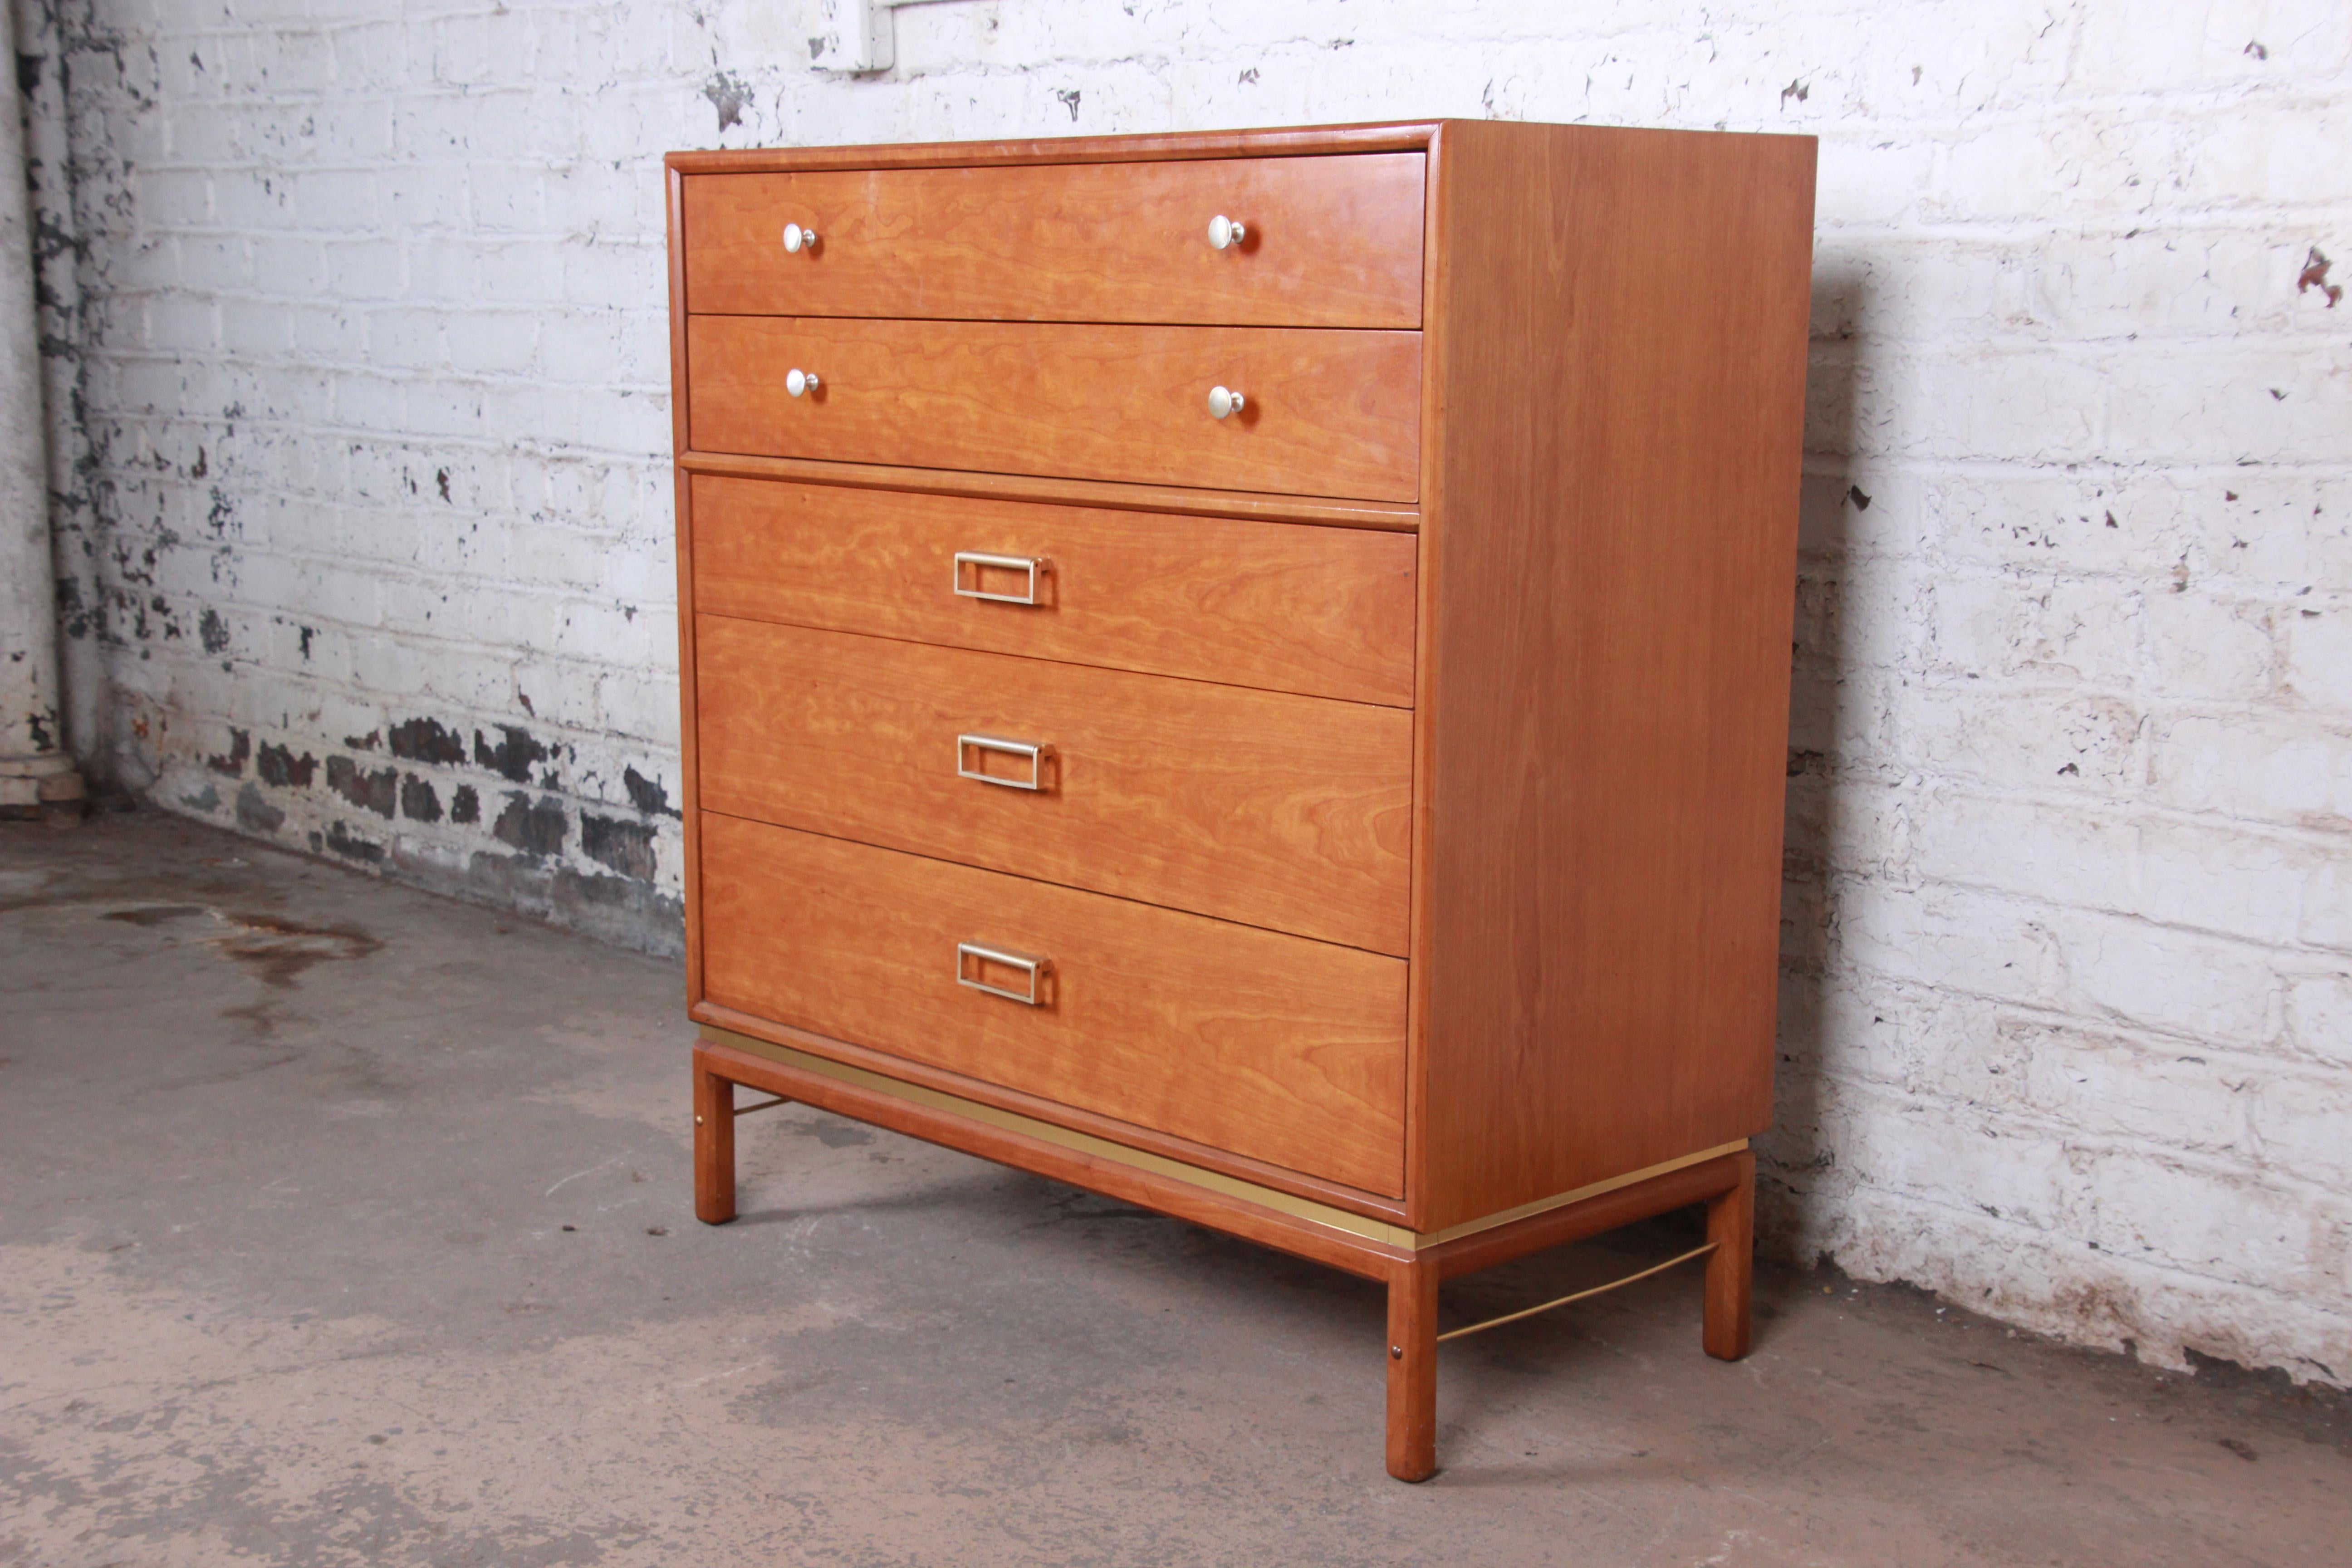 Offering a very nice Kipp Stewart for Drexel sun coast Mid-Century Modern highboy dresser. The dresser has a beautiful cherrywood grain with five large drawers that opens and close smoothly. It has nice original aluminum pulls with drawer dividers